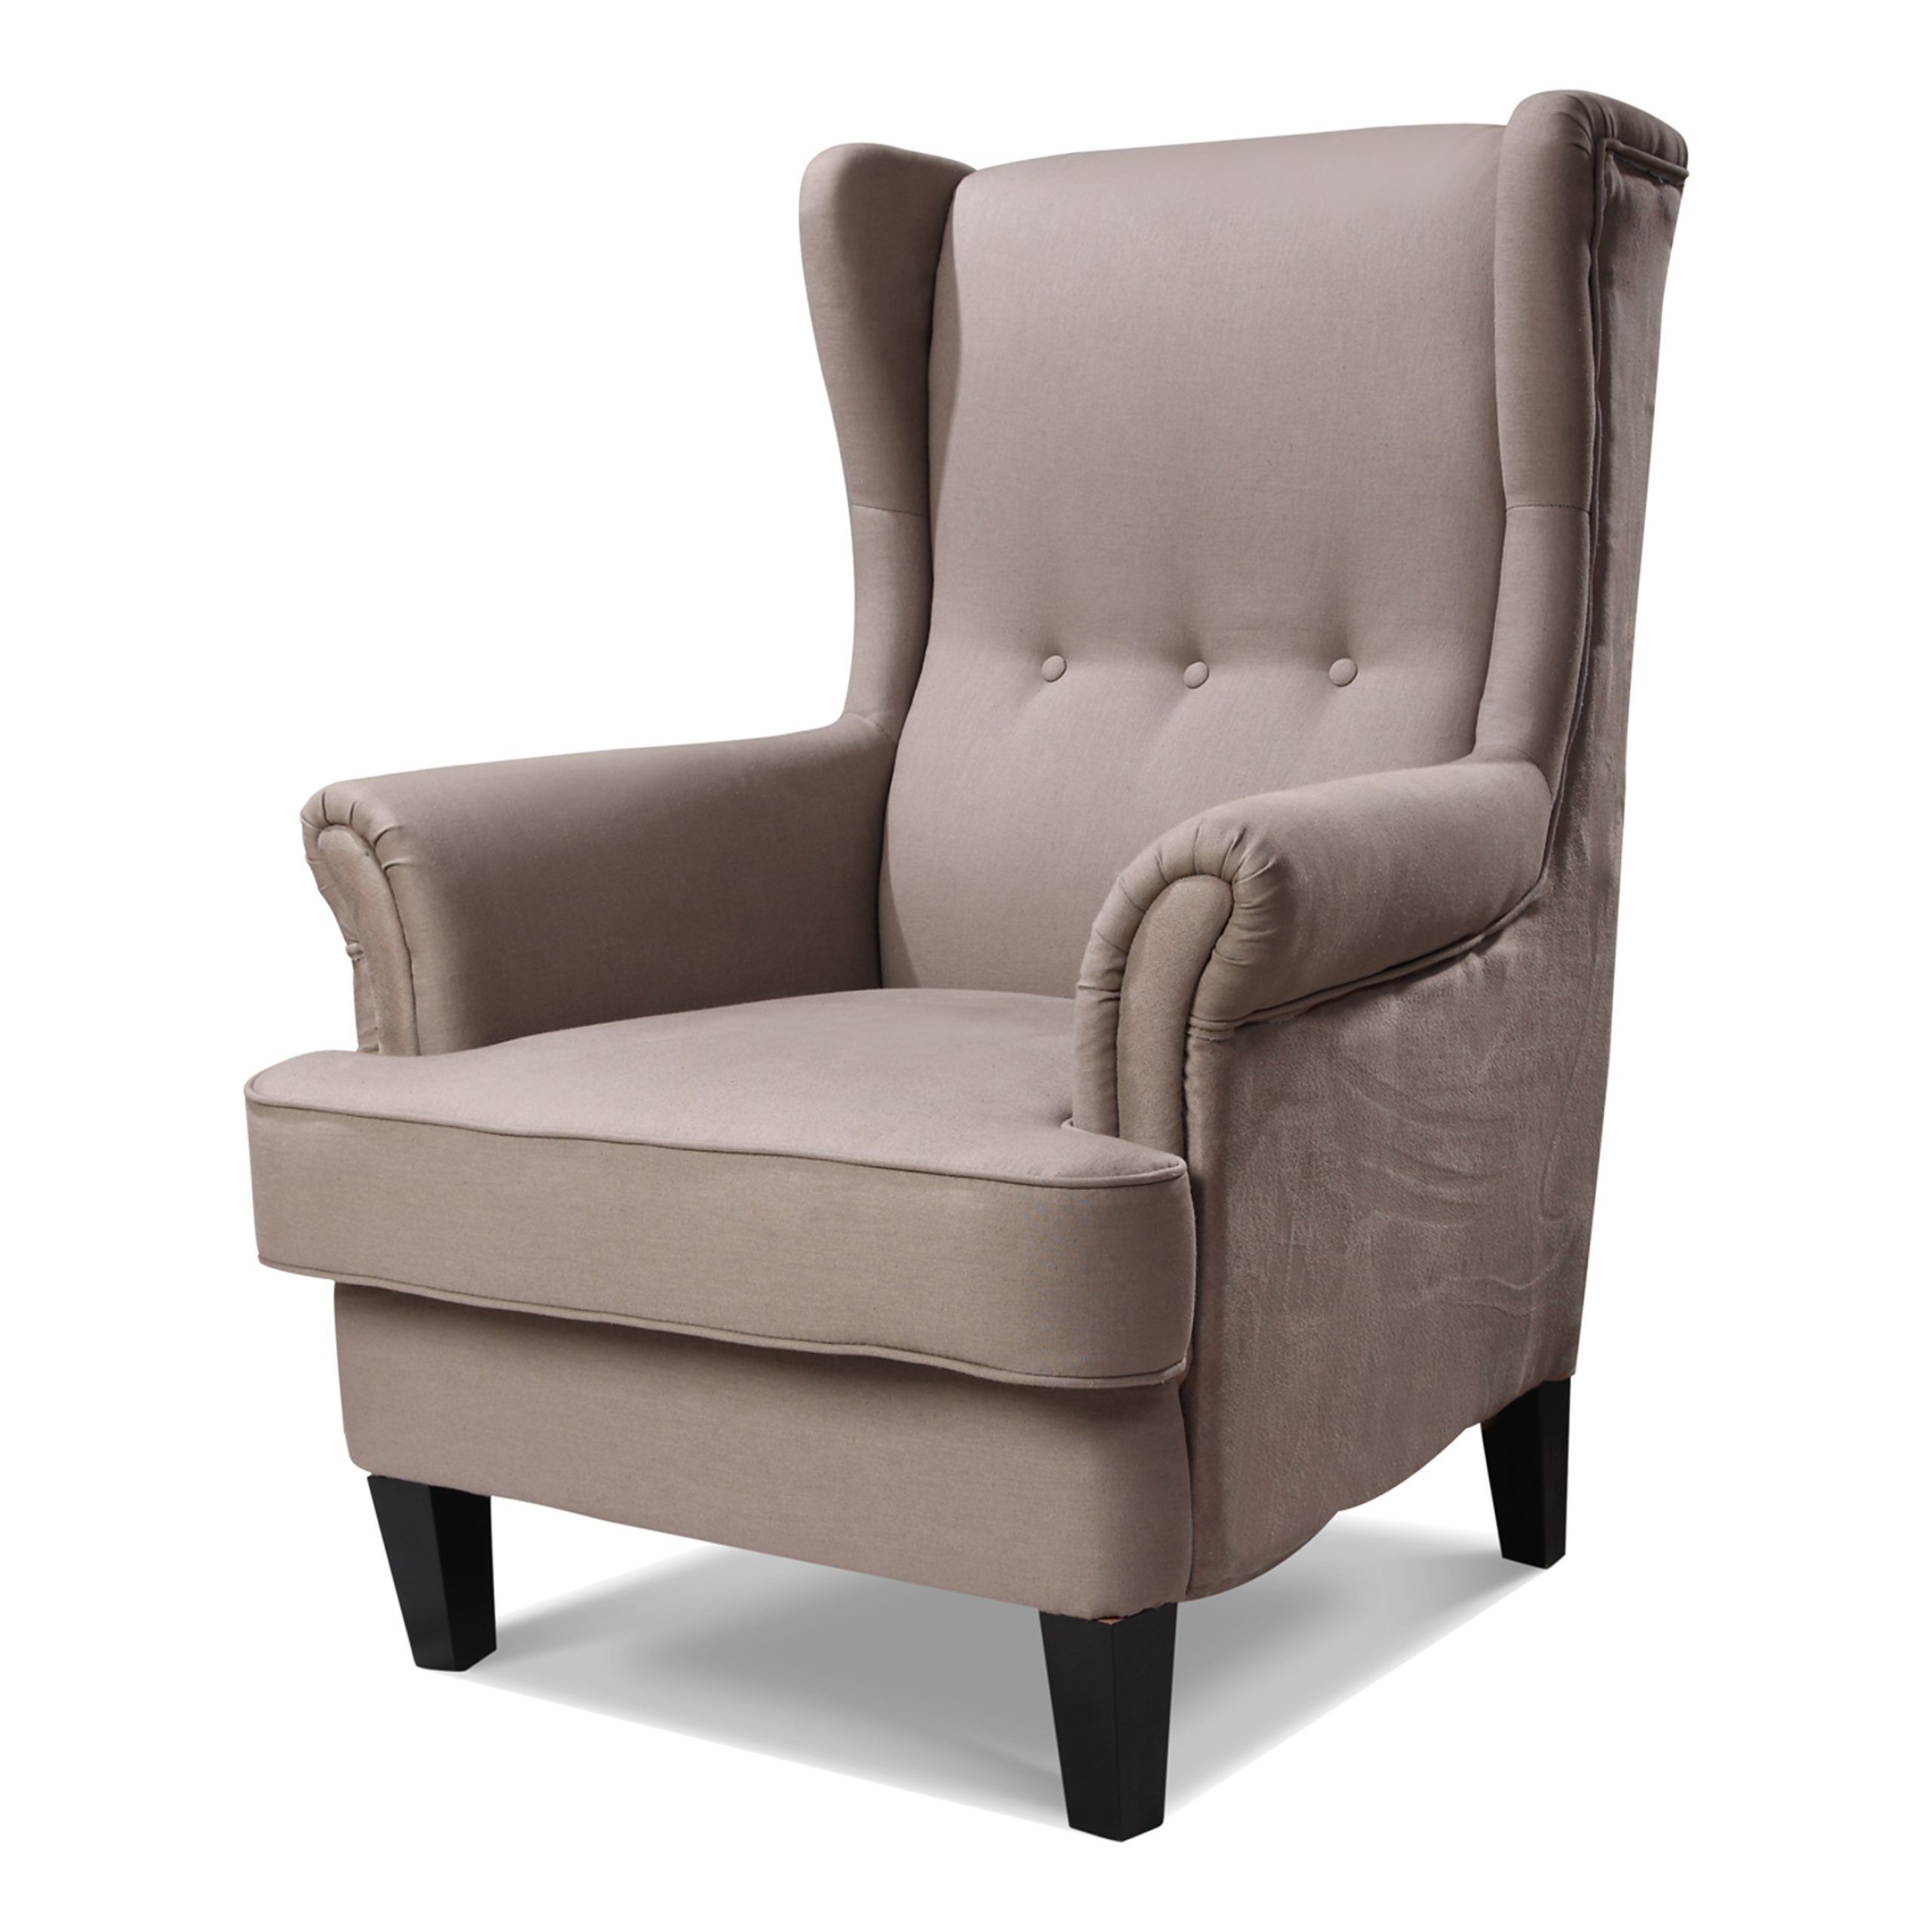 Austin Wingback Chair Upholstered In 'Key West' Linen Throughout Sofa Arm Chairs (View 8 of 15)